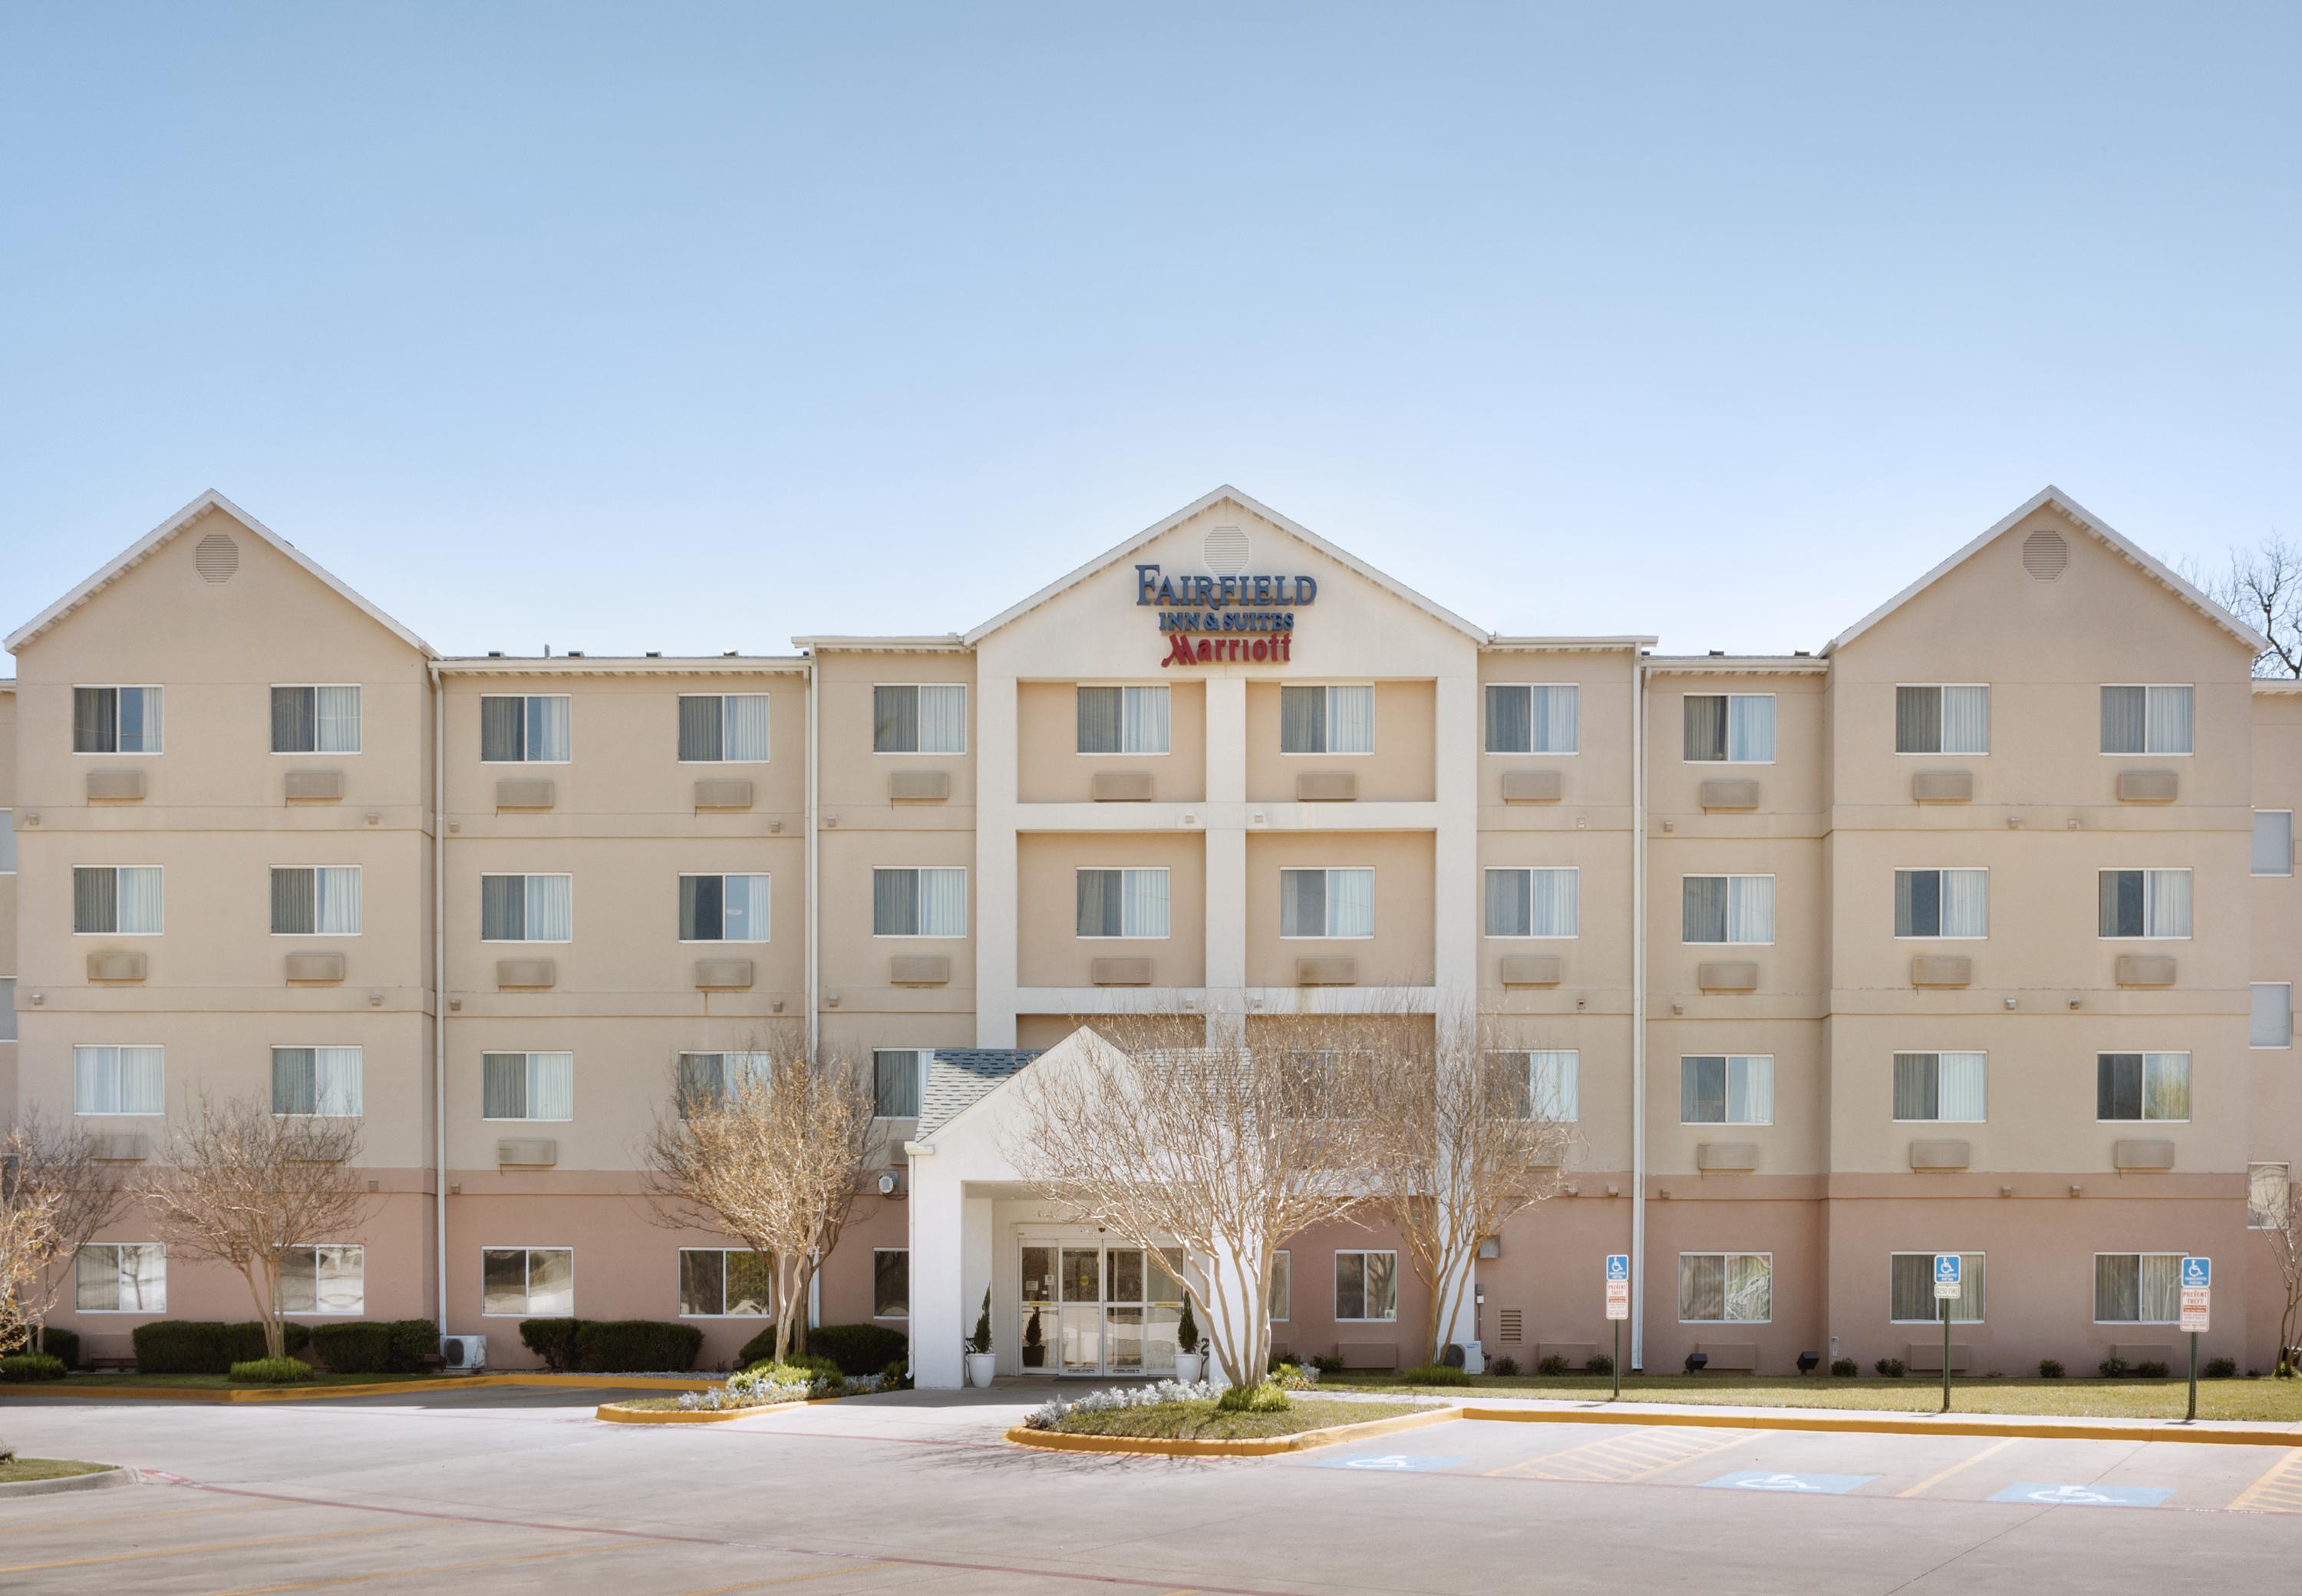 Photo of Fairfield Inn & Suites by Marriott Fort Worth University Drive, Fort Worth, TX